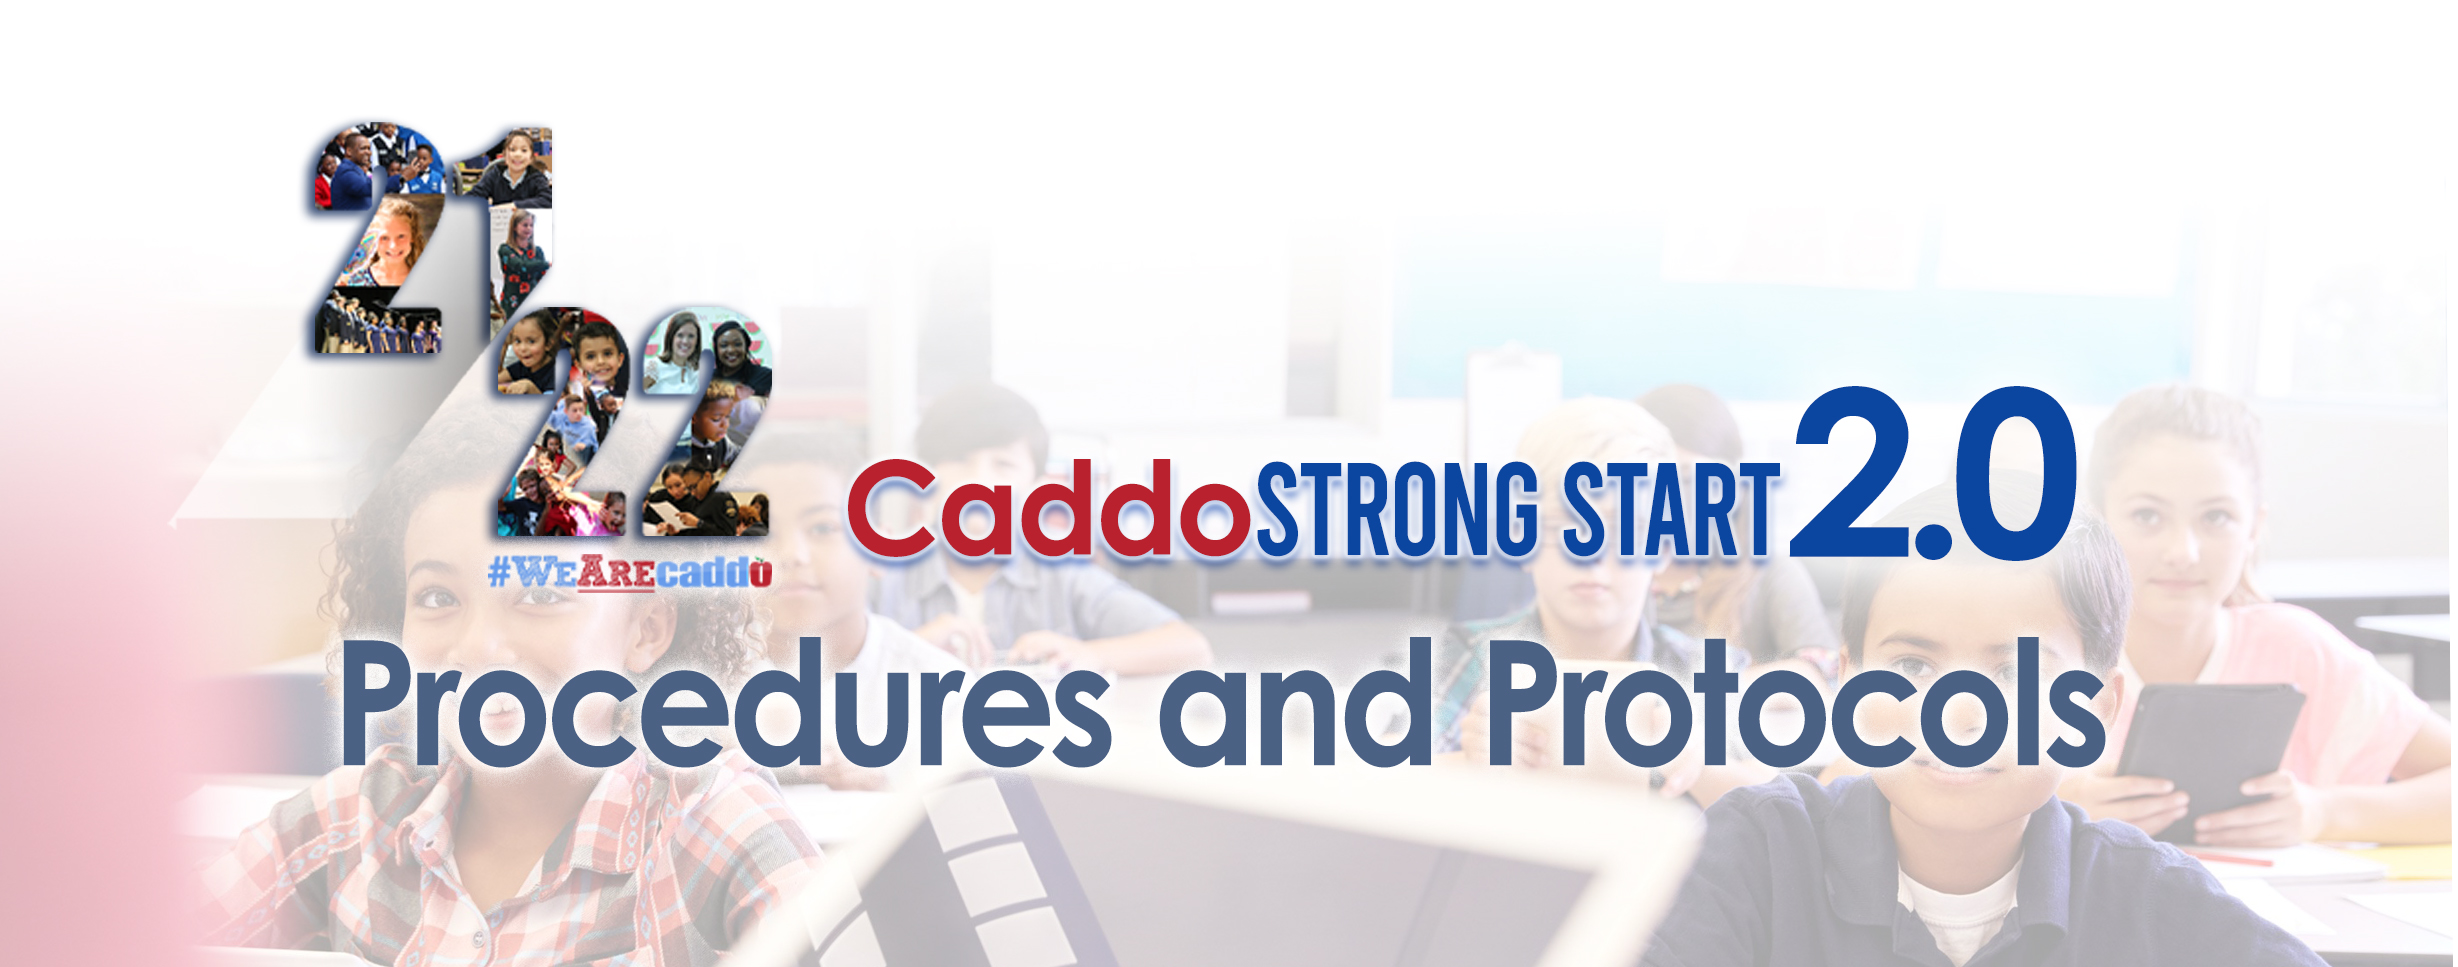 Caddo Strong Start 2.0 Procedures and Protocols